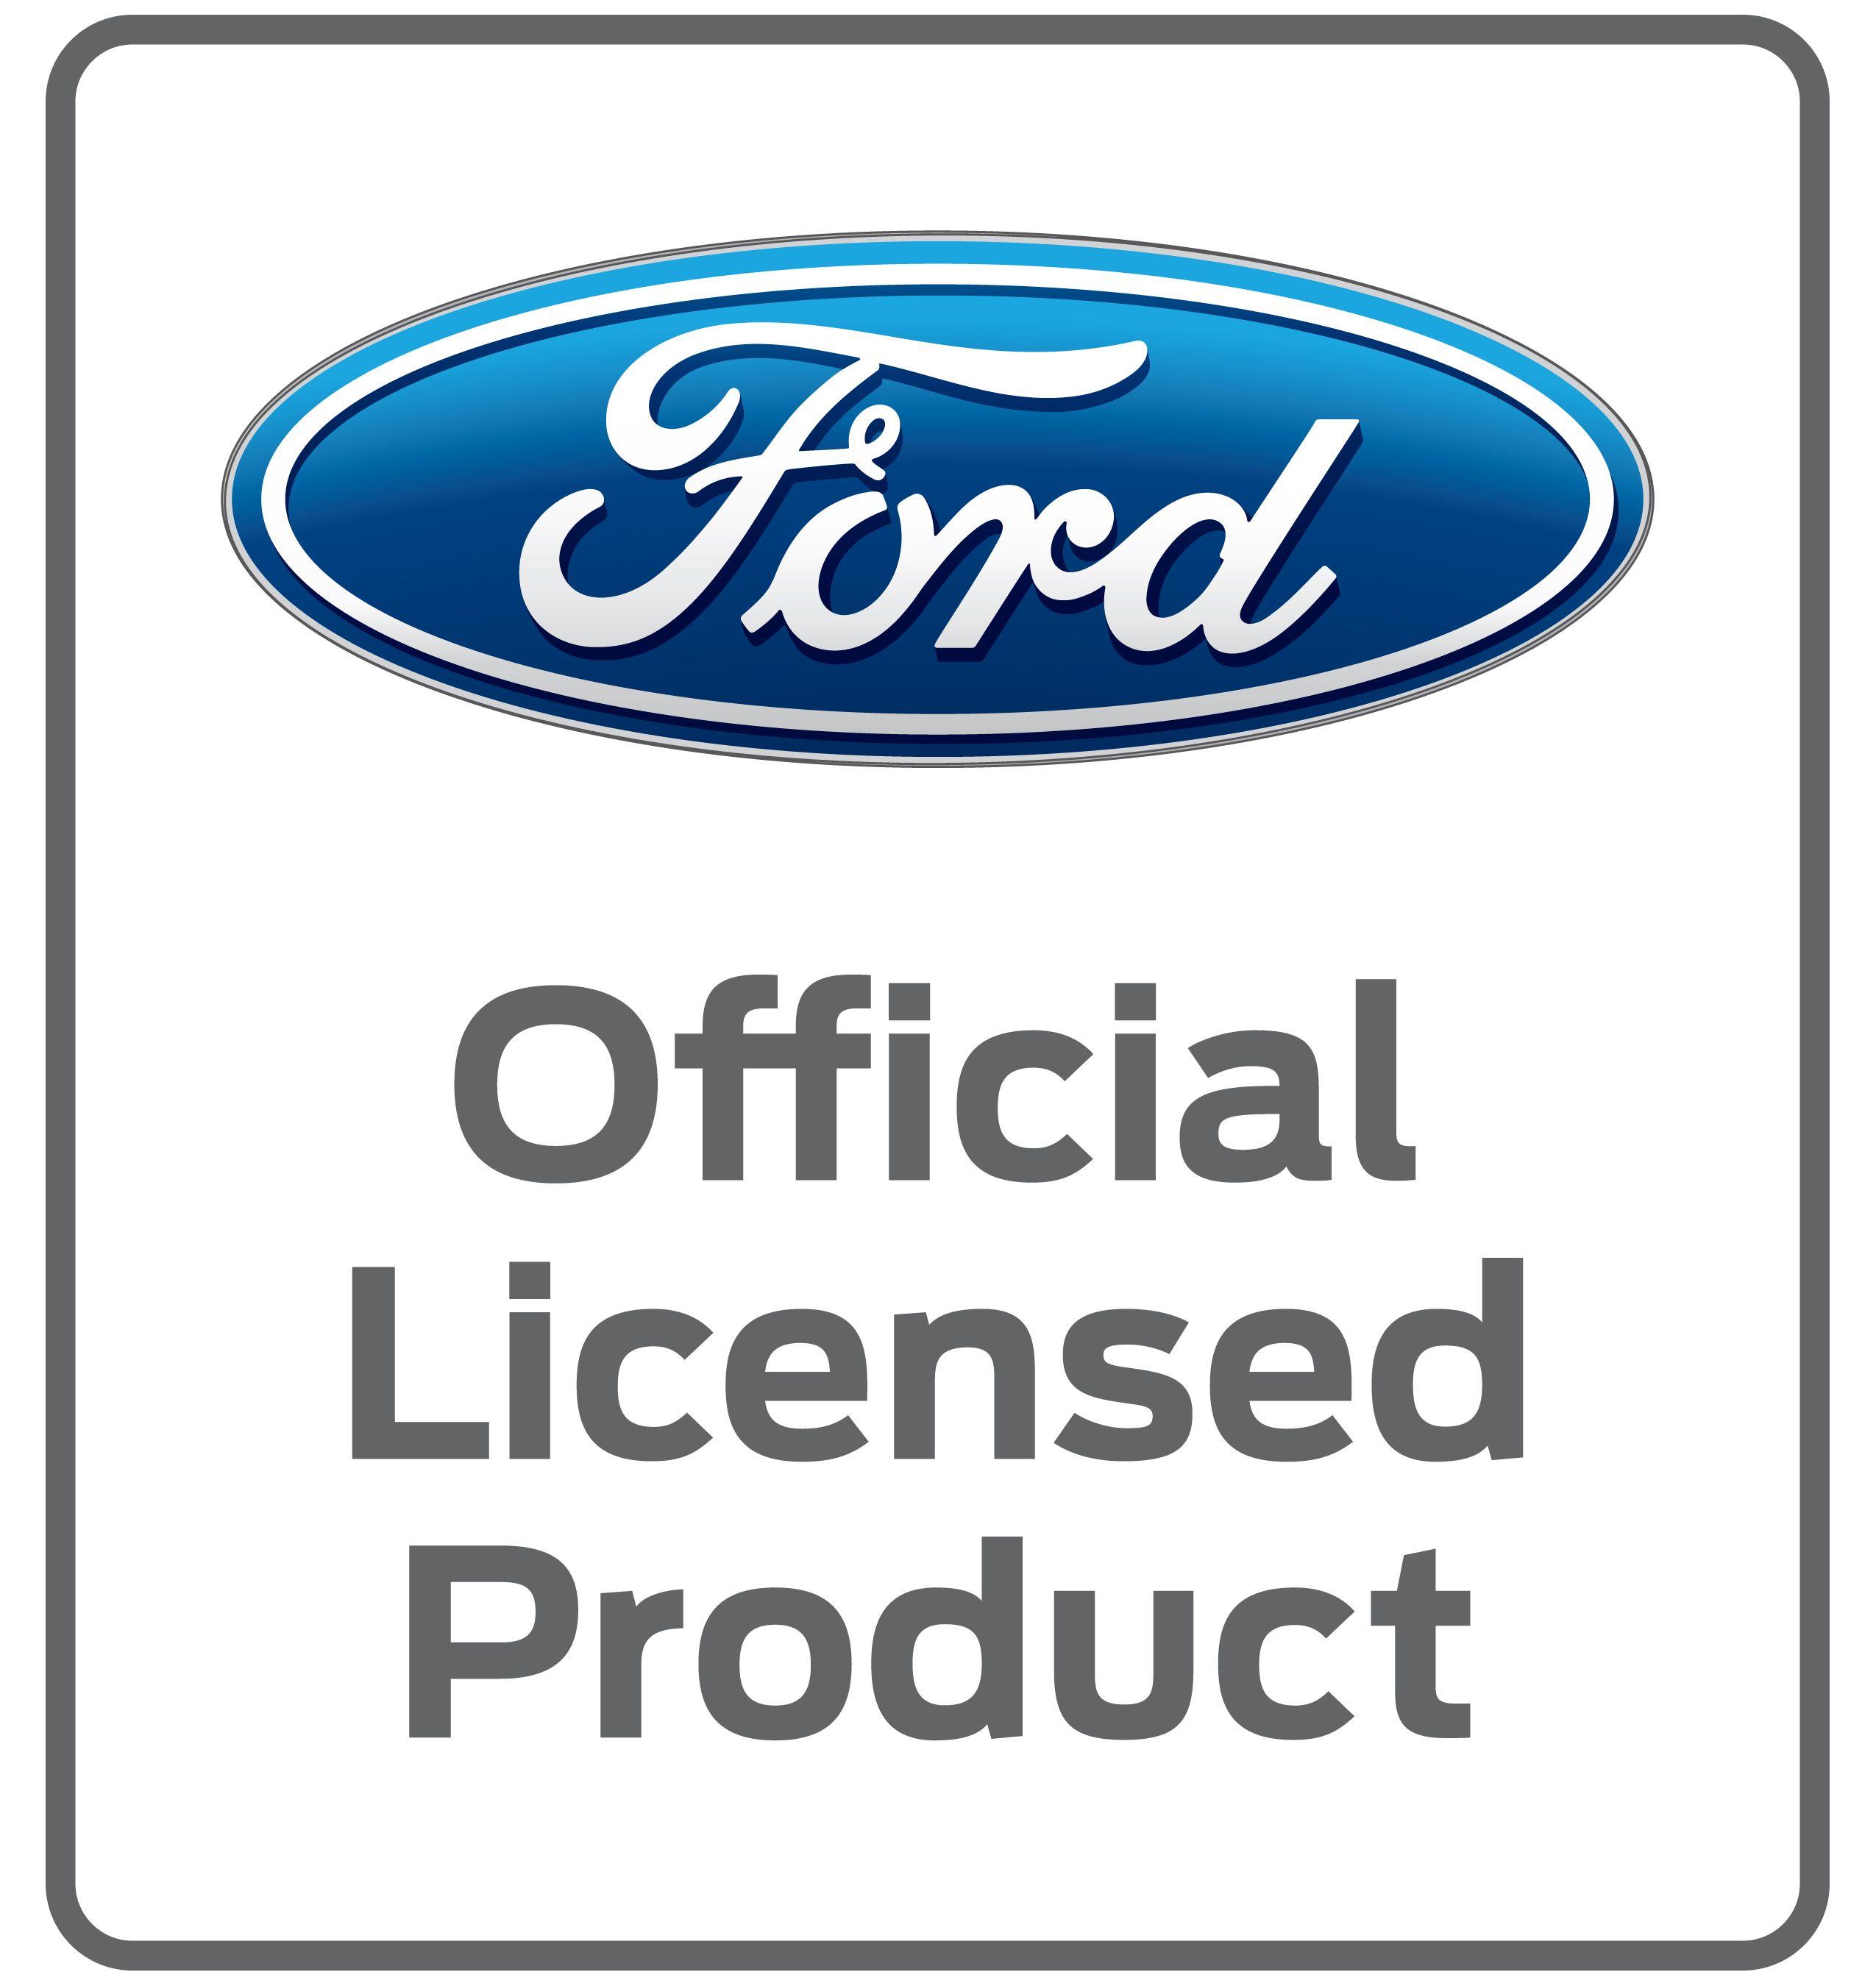 American Car Parts Company Logo - Licenced Ford Logo Service Parts T Shirt Genuine Classic American V8 ...